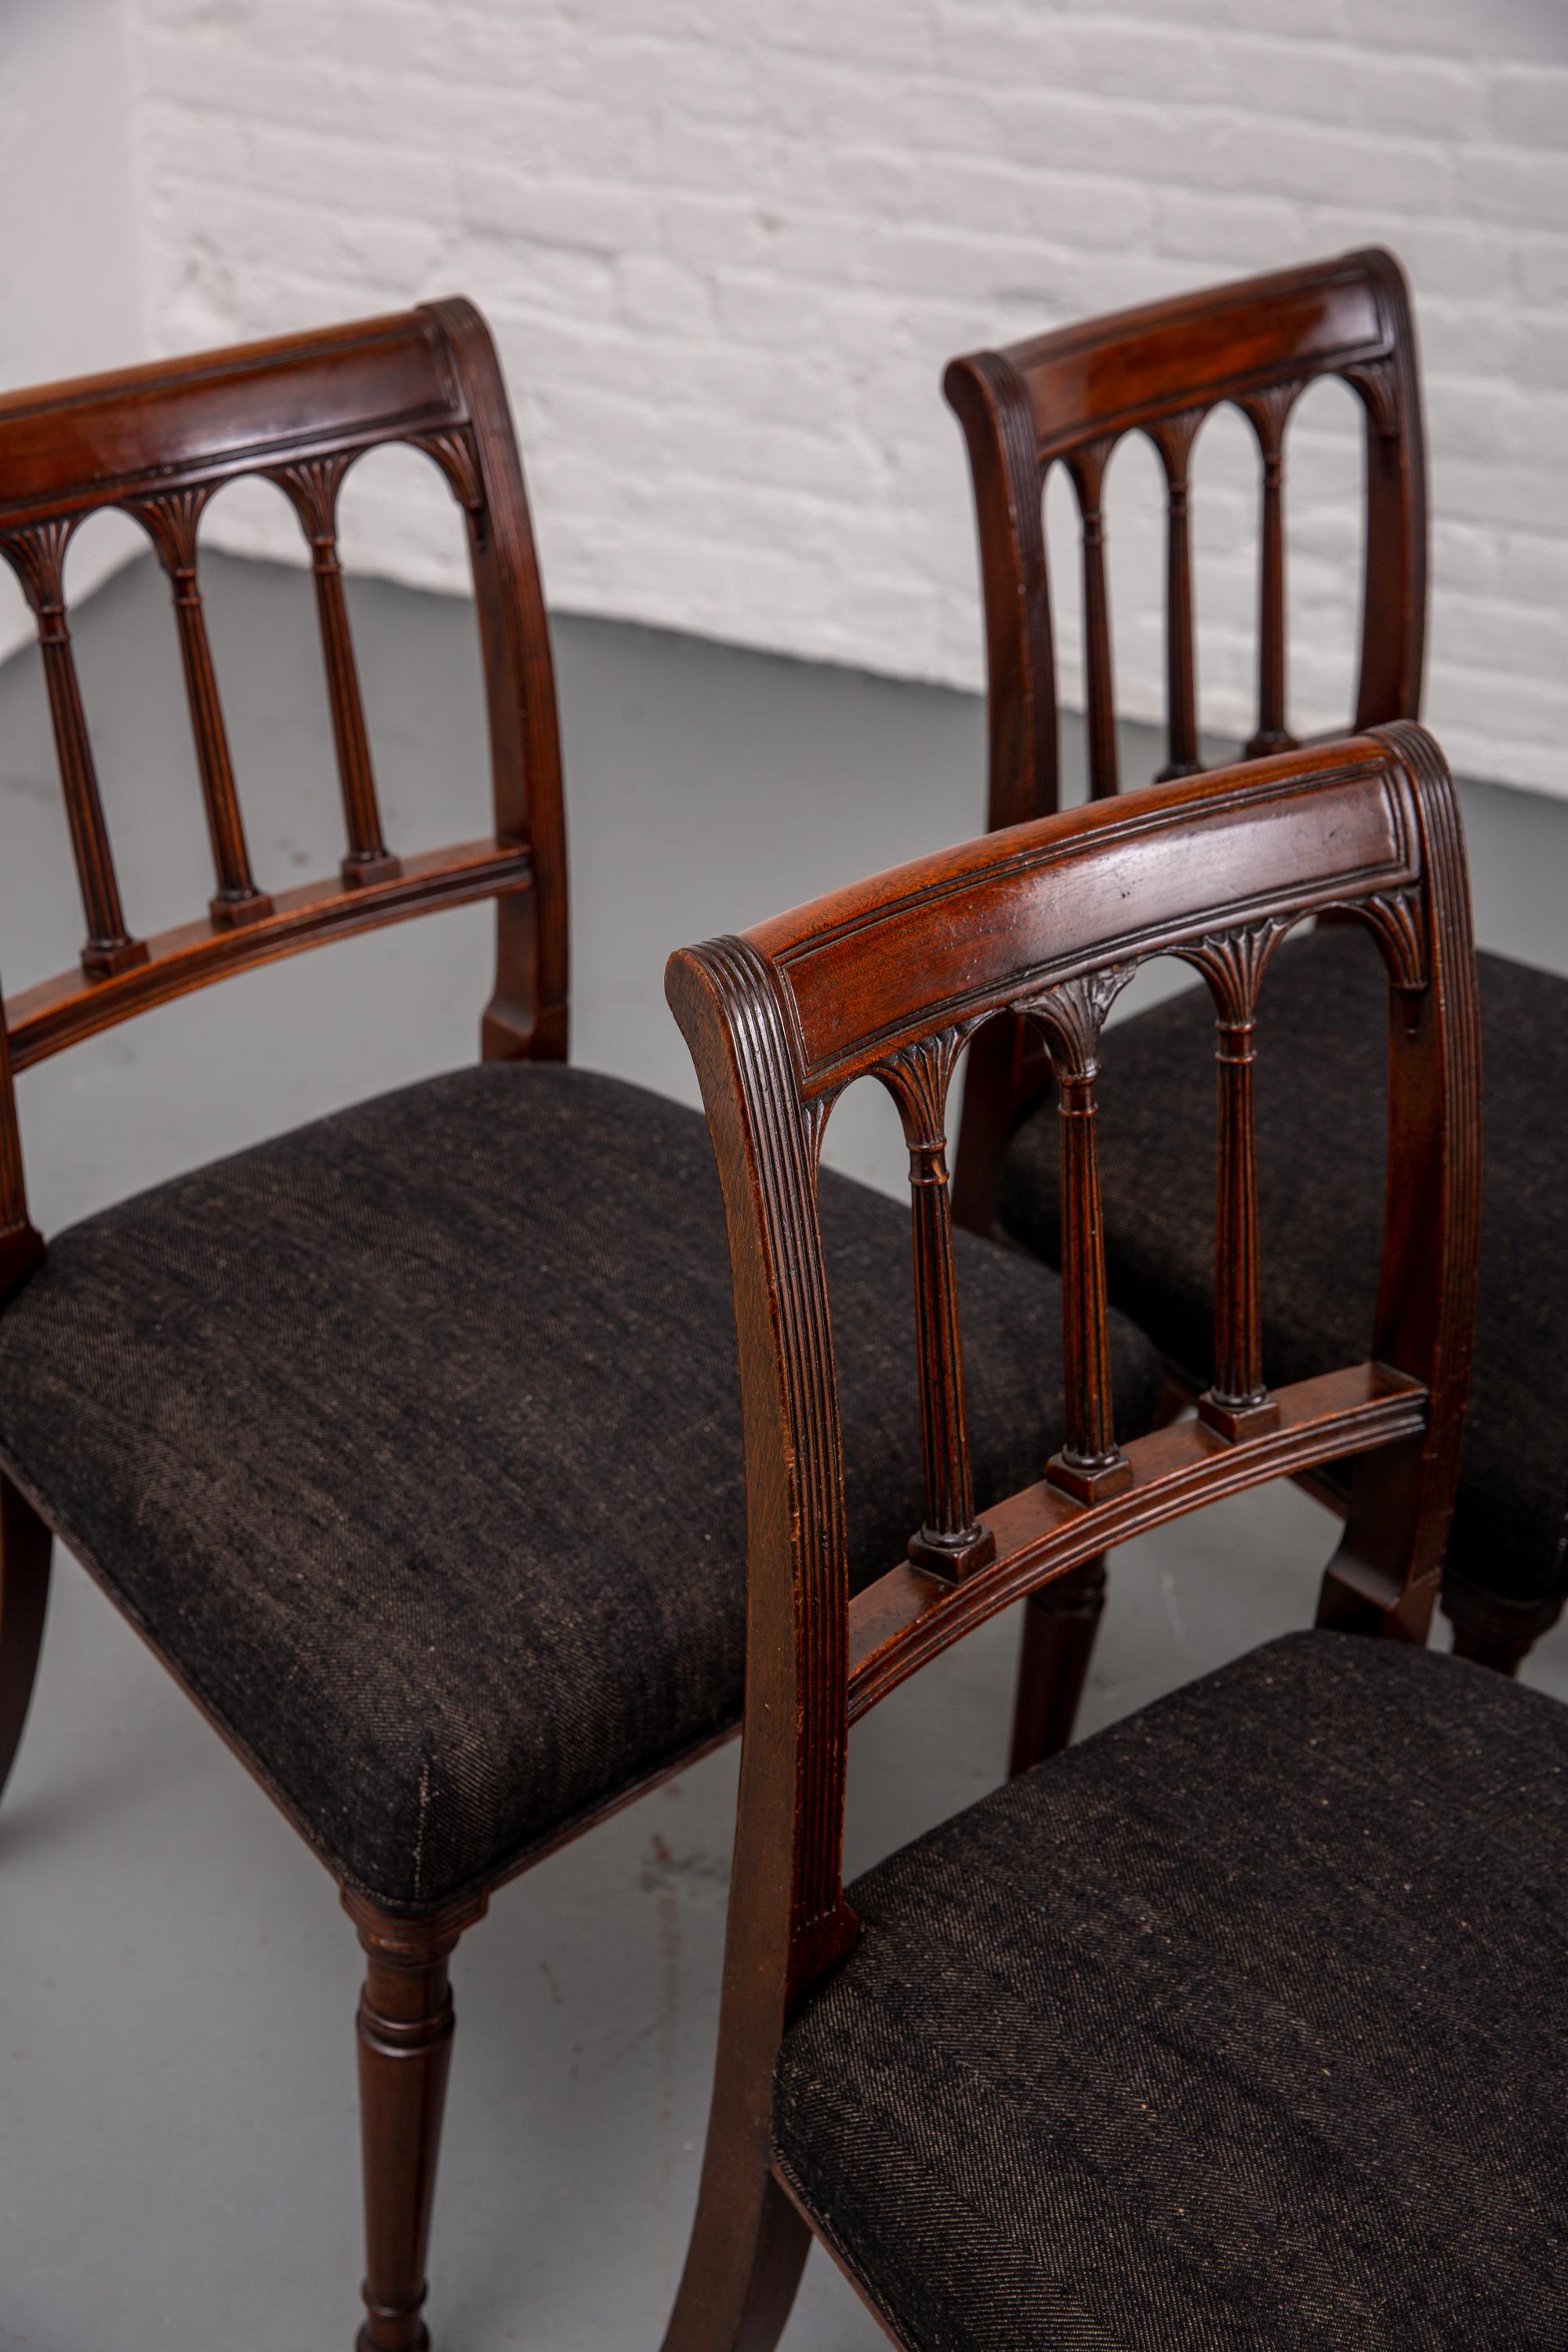 Set of four 19th century mahogany dining chairs with newly upholstered seats. Tapered legs to front. Neoclassical style. Carved column detailing. Marking to wood throughout, please see photos. Newly upholstered in herringbone black/brown fabric.